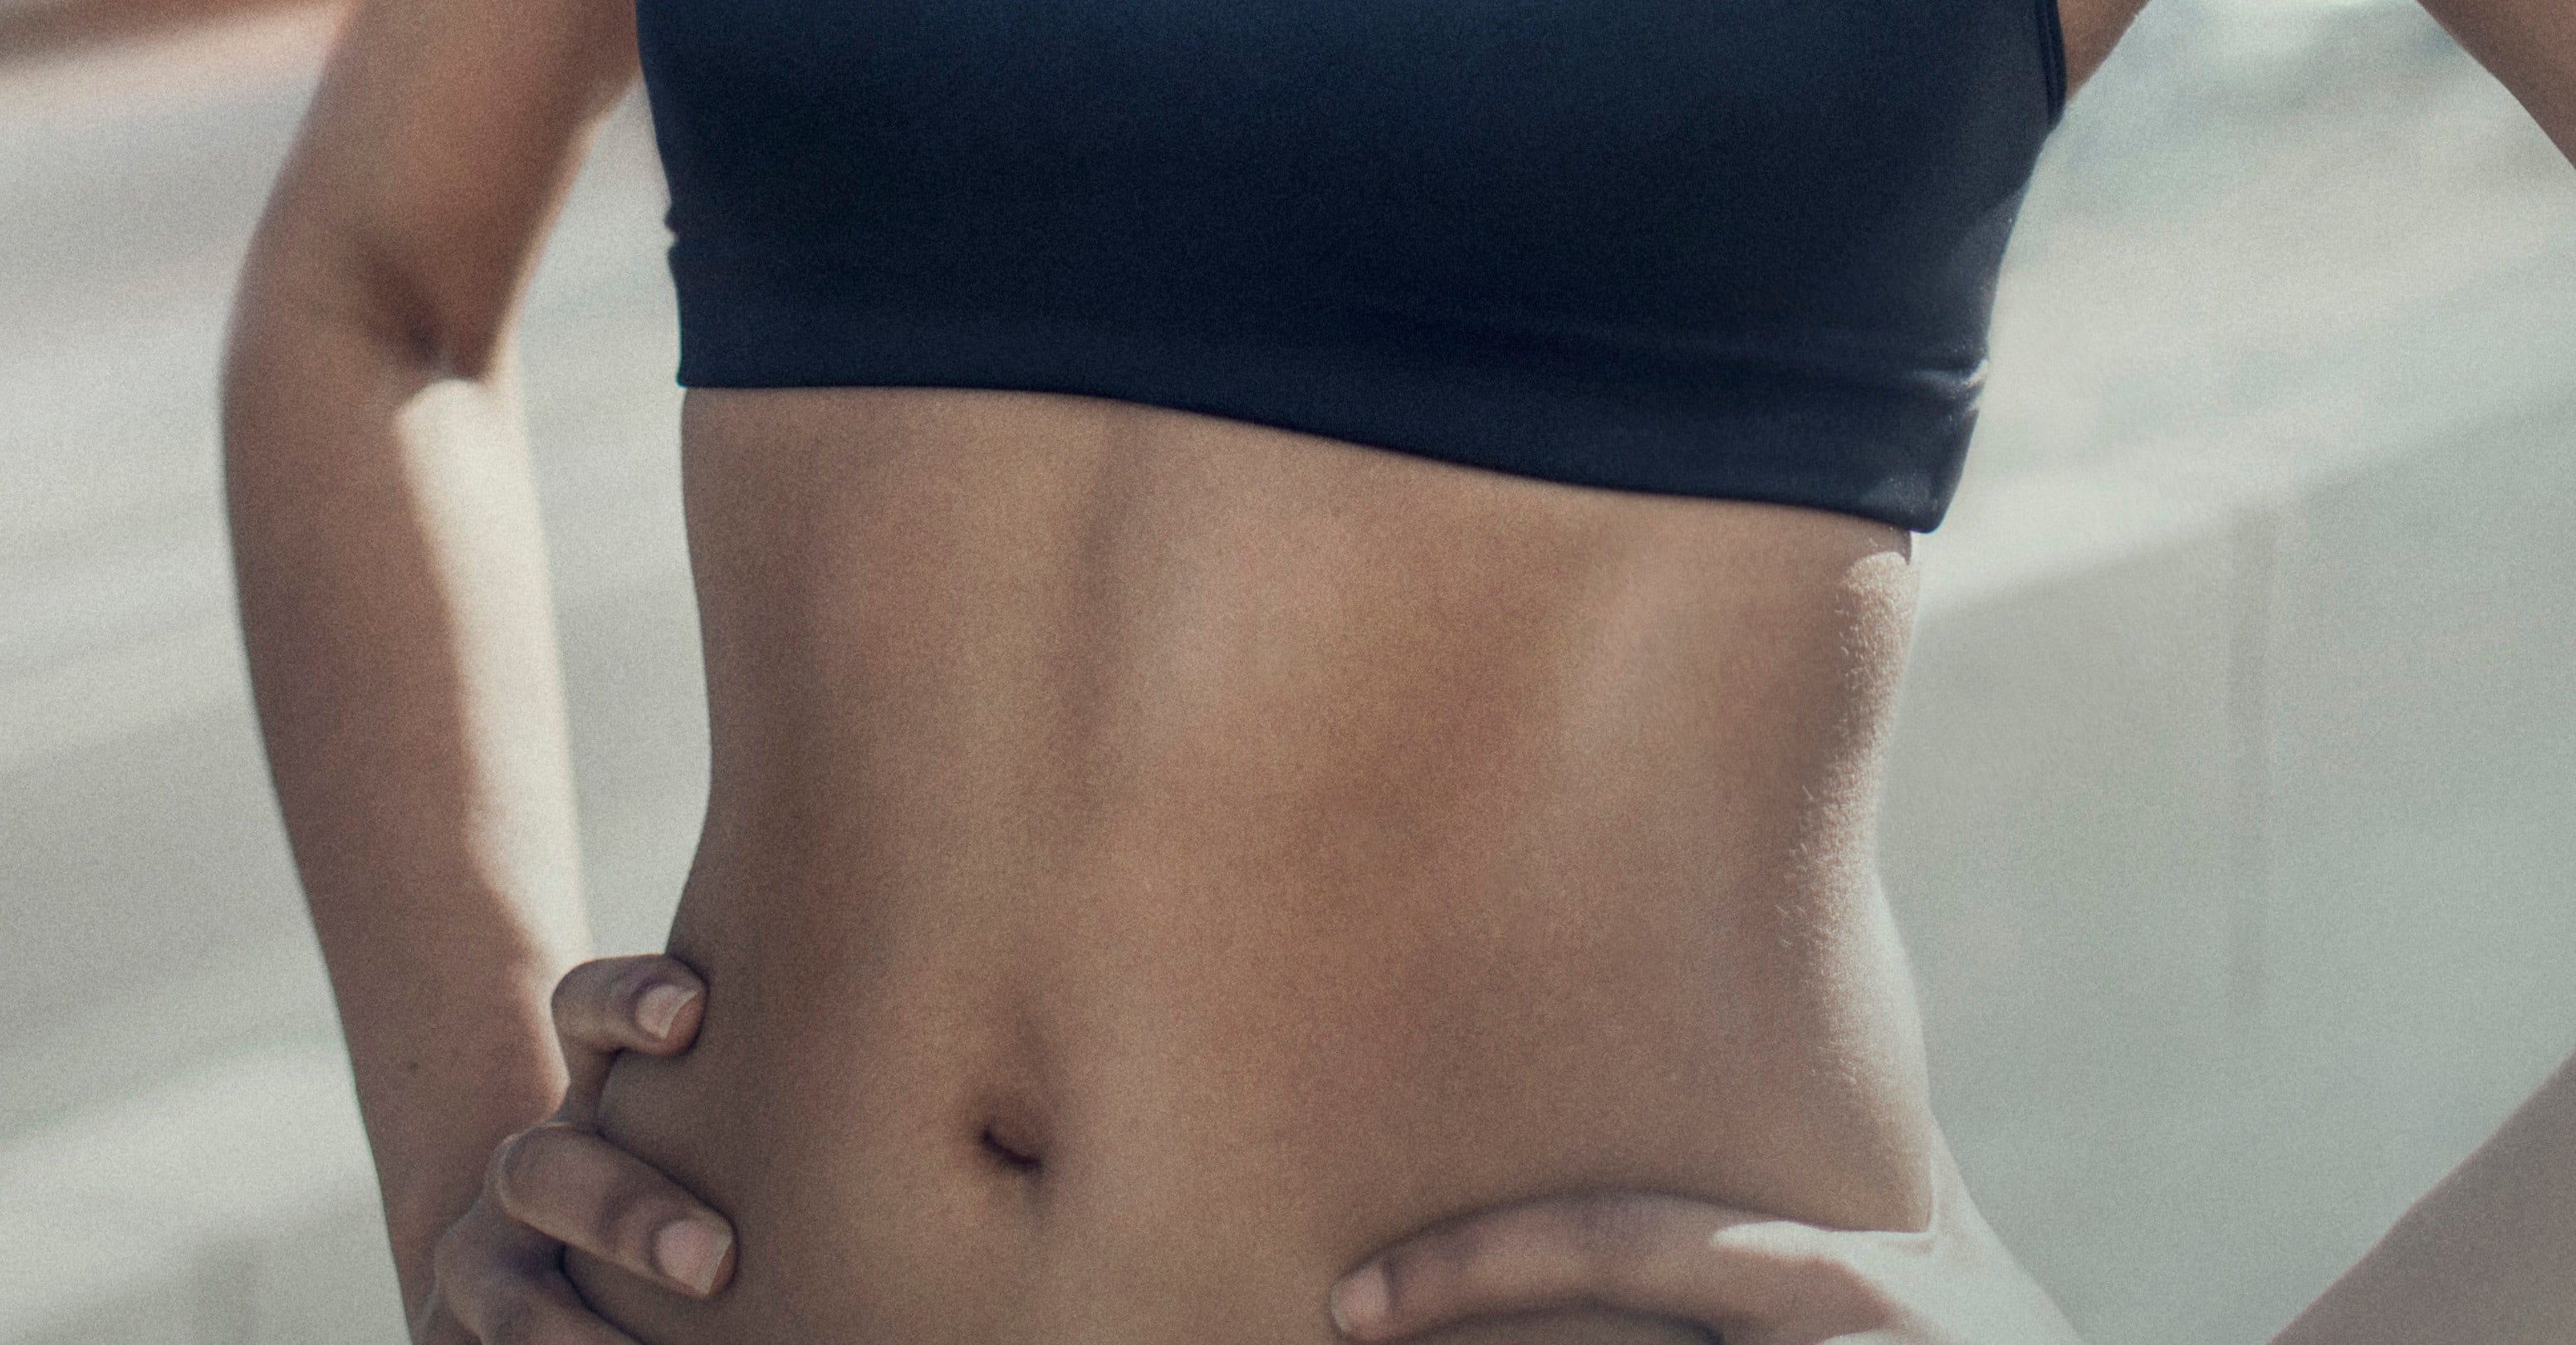 Ab Workouts To Know To Get A Toned Core & Whittle Your Waist